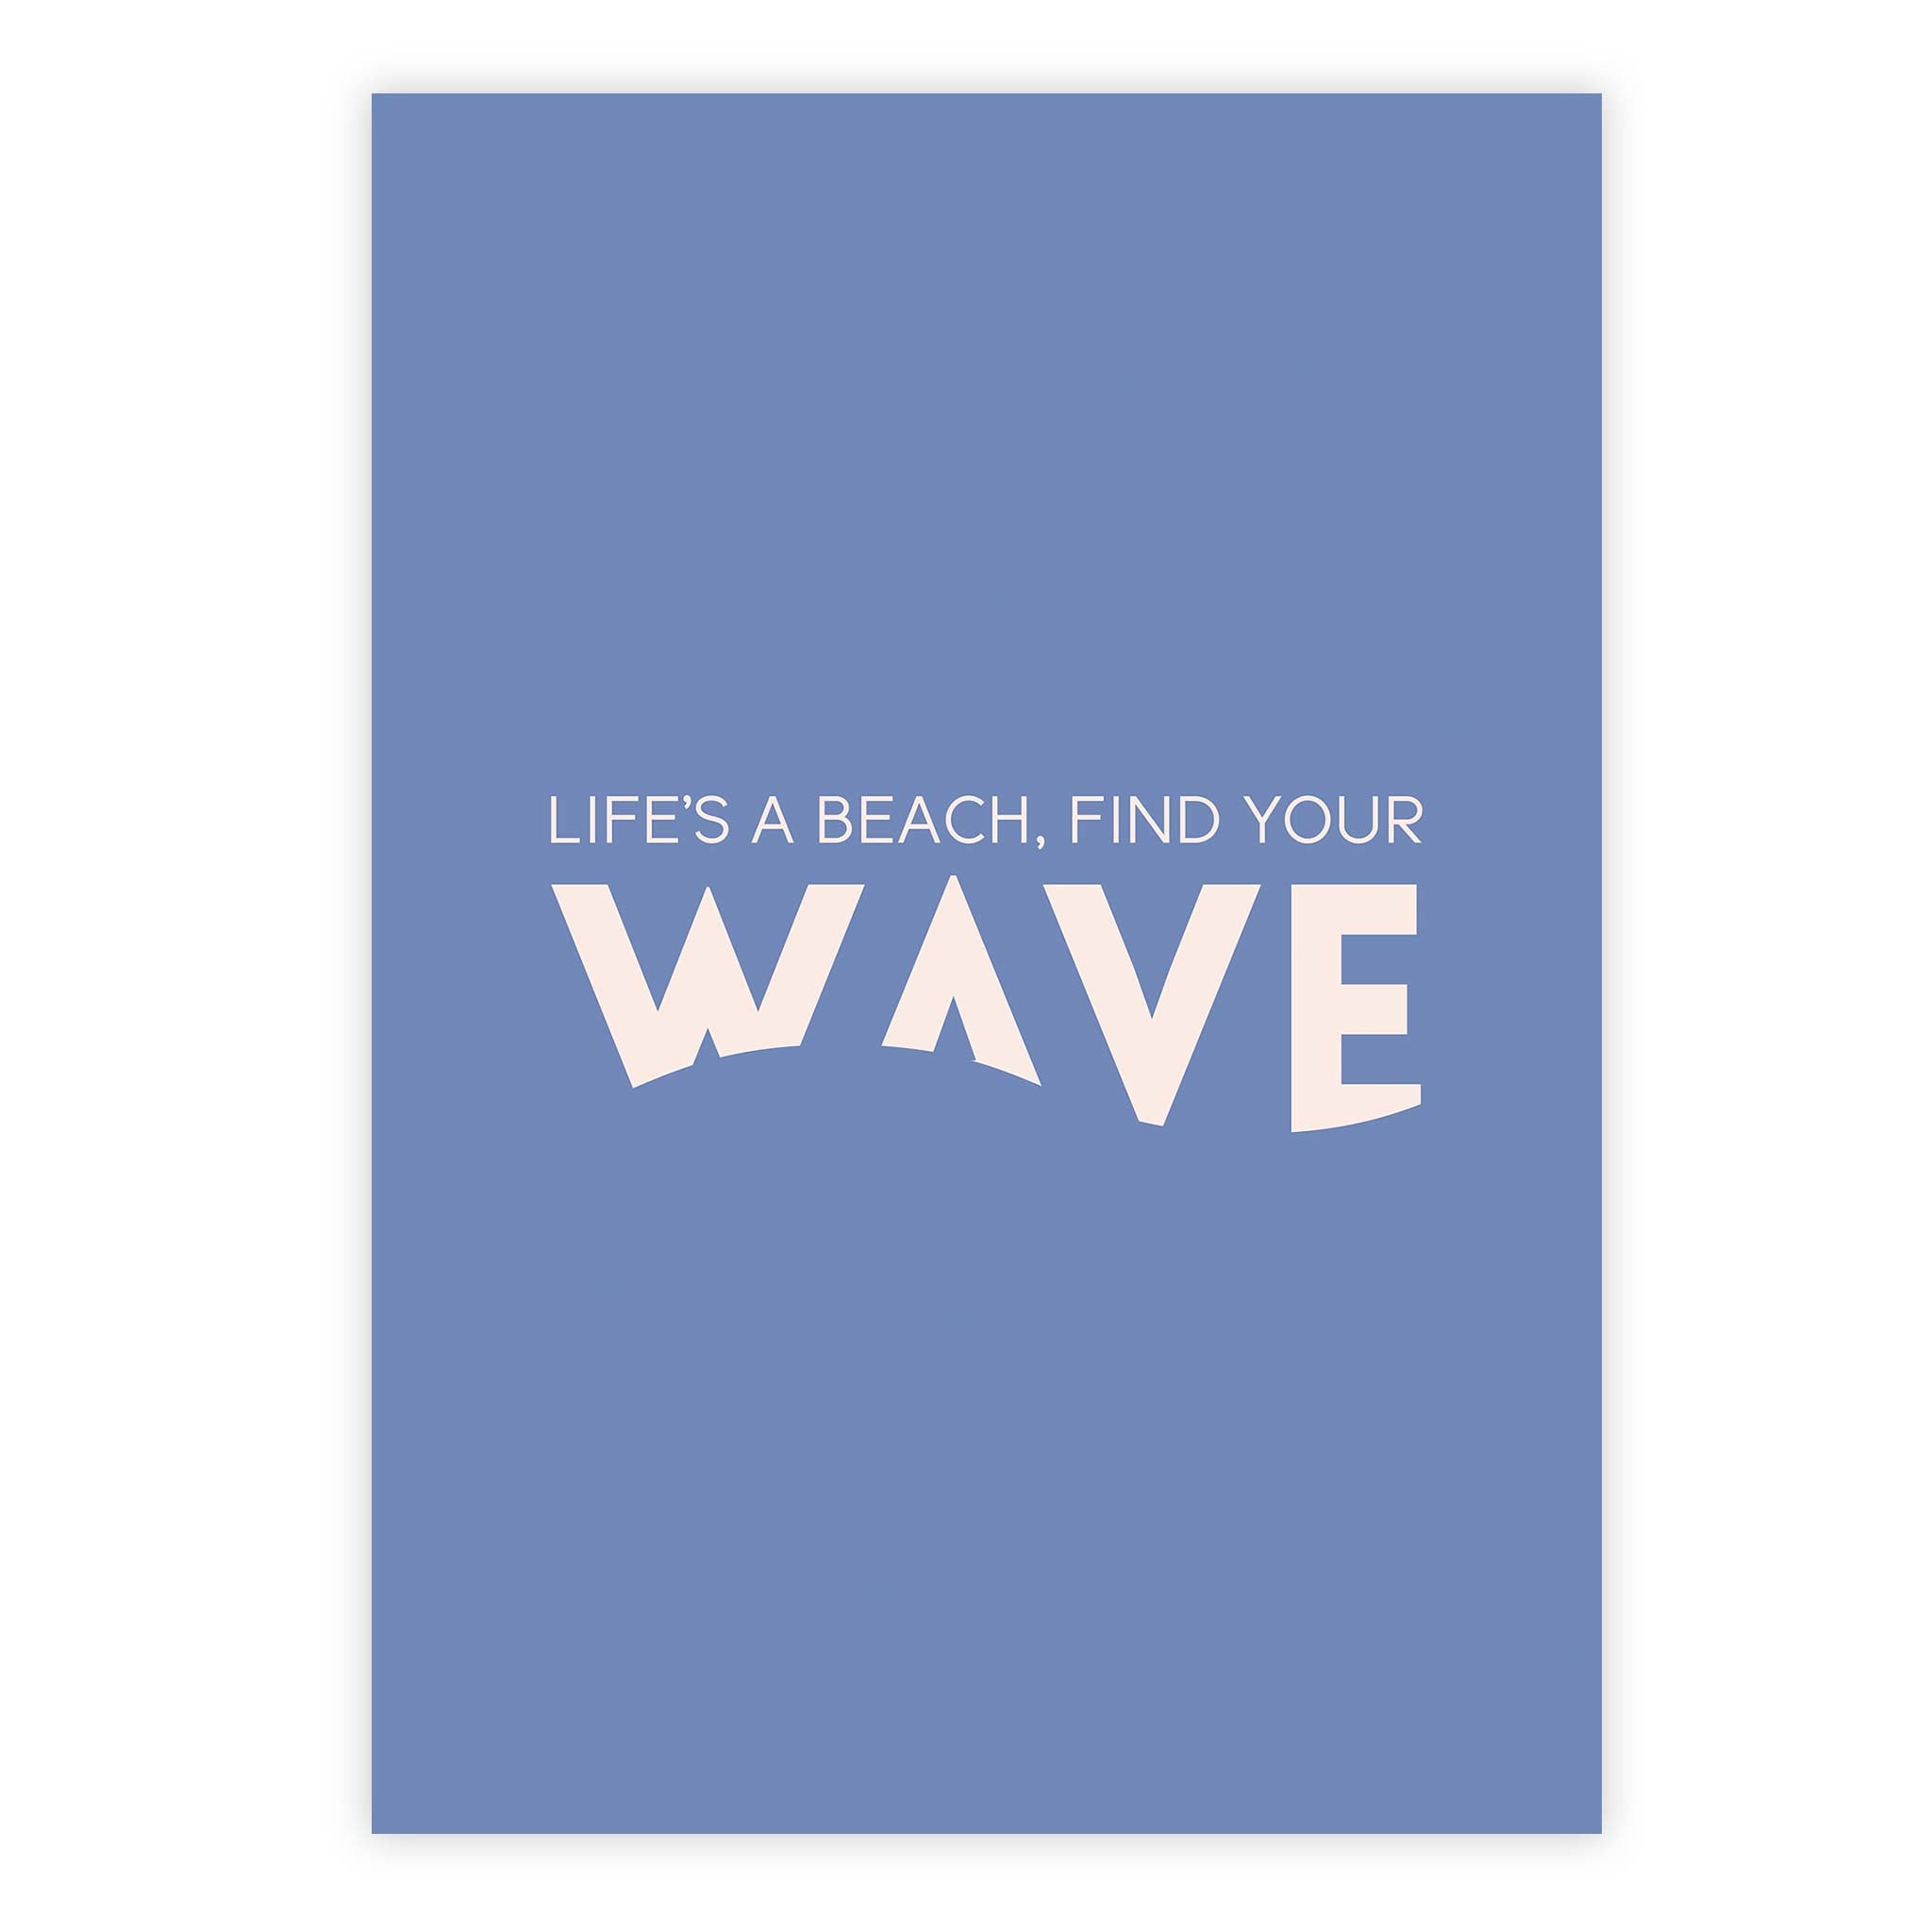 Life’s a beach, find your wave